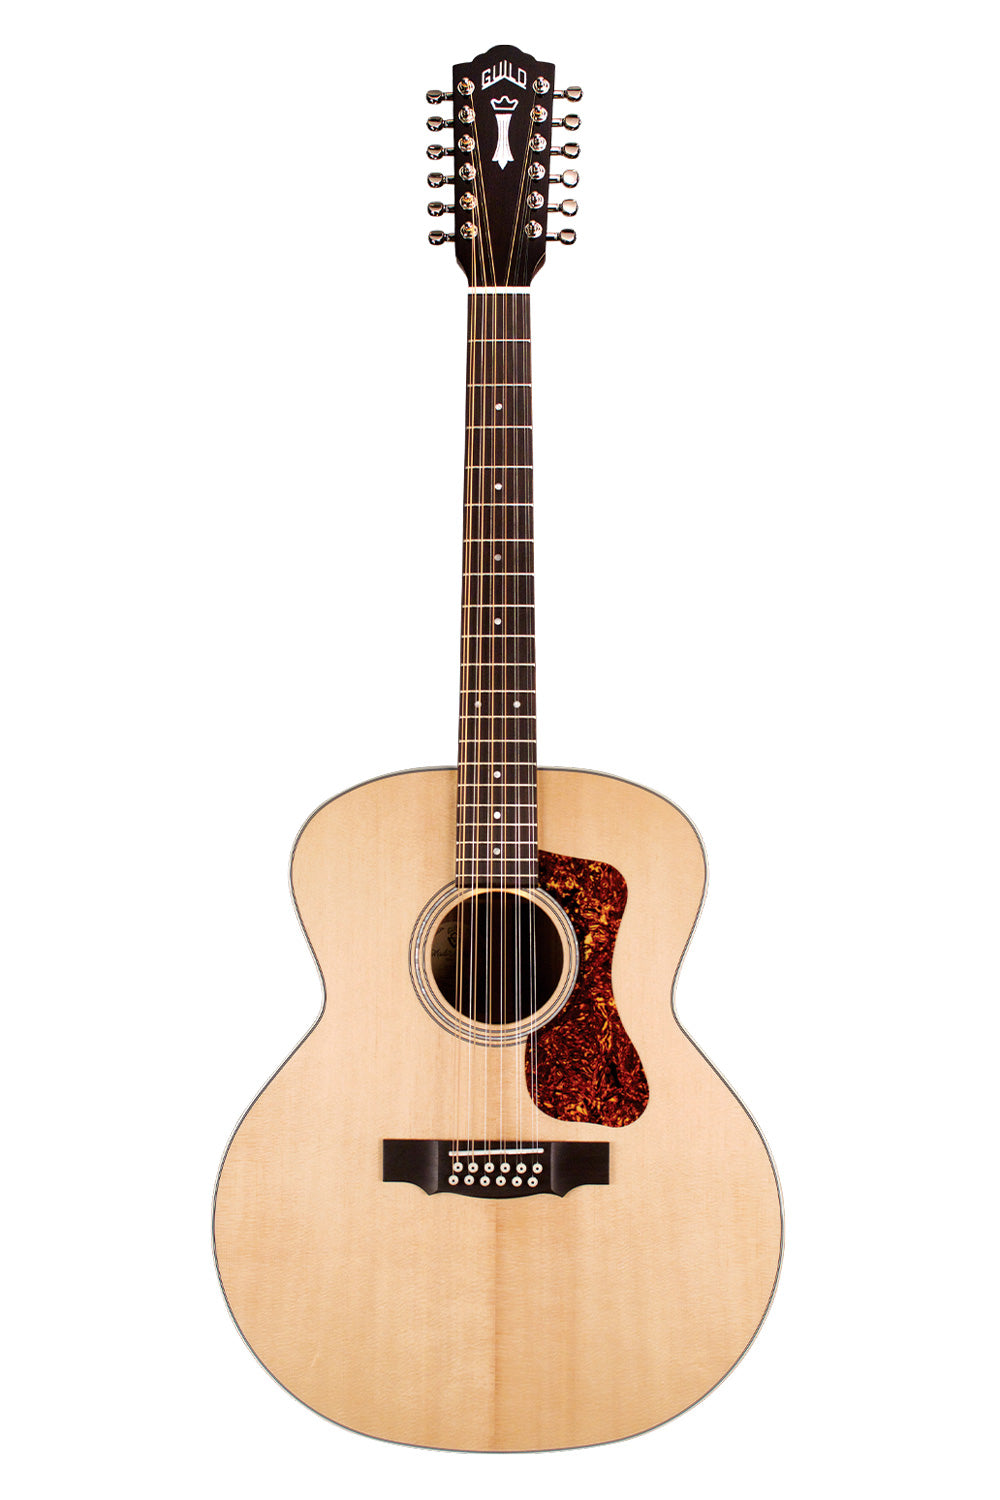 Guild F-1512 12-String Acoustic Guitar - Natural Gloss